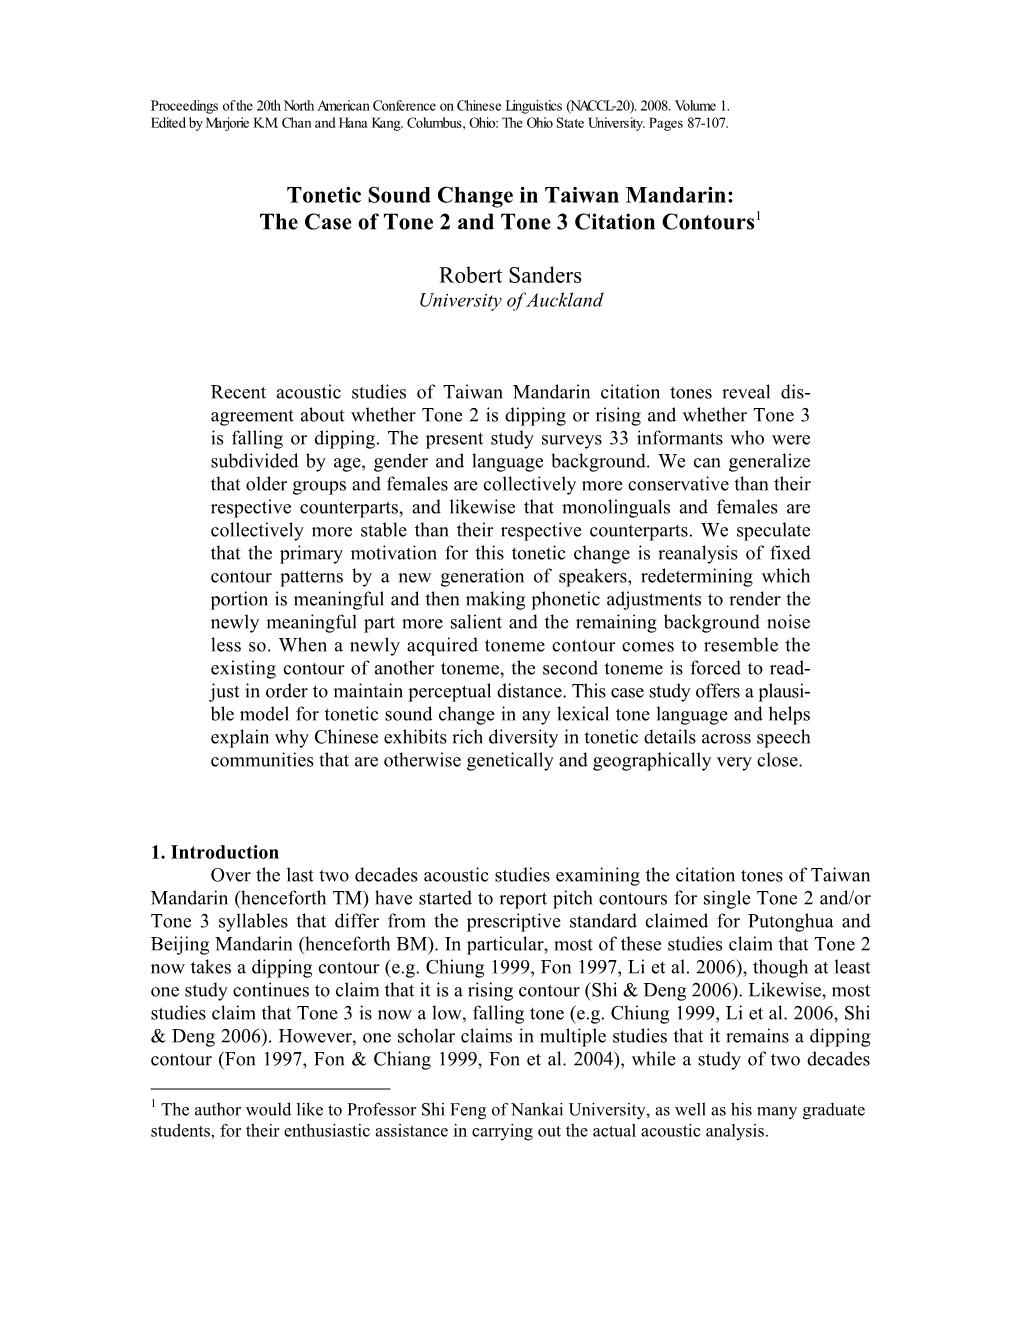 Tonetic Sound Change in Taiwan Mandarin: the Case of Tone 2 and Tone 3 Citation Contours1